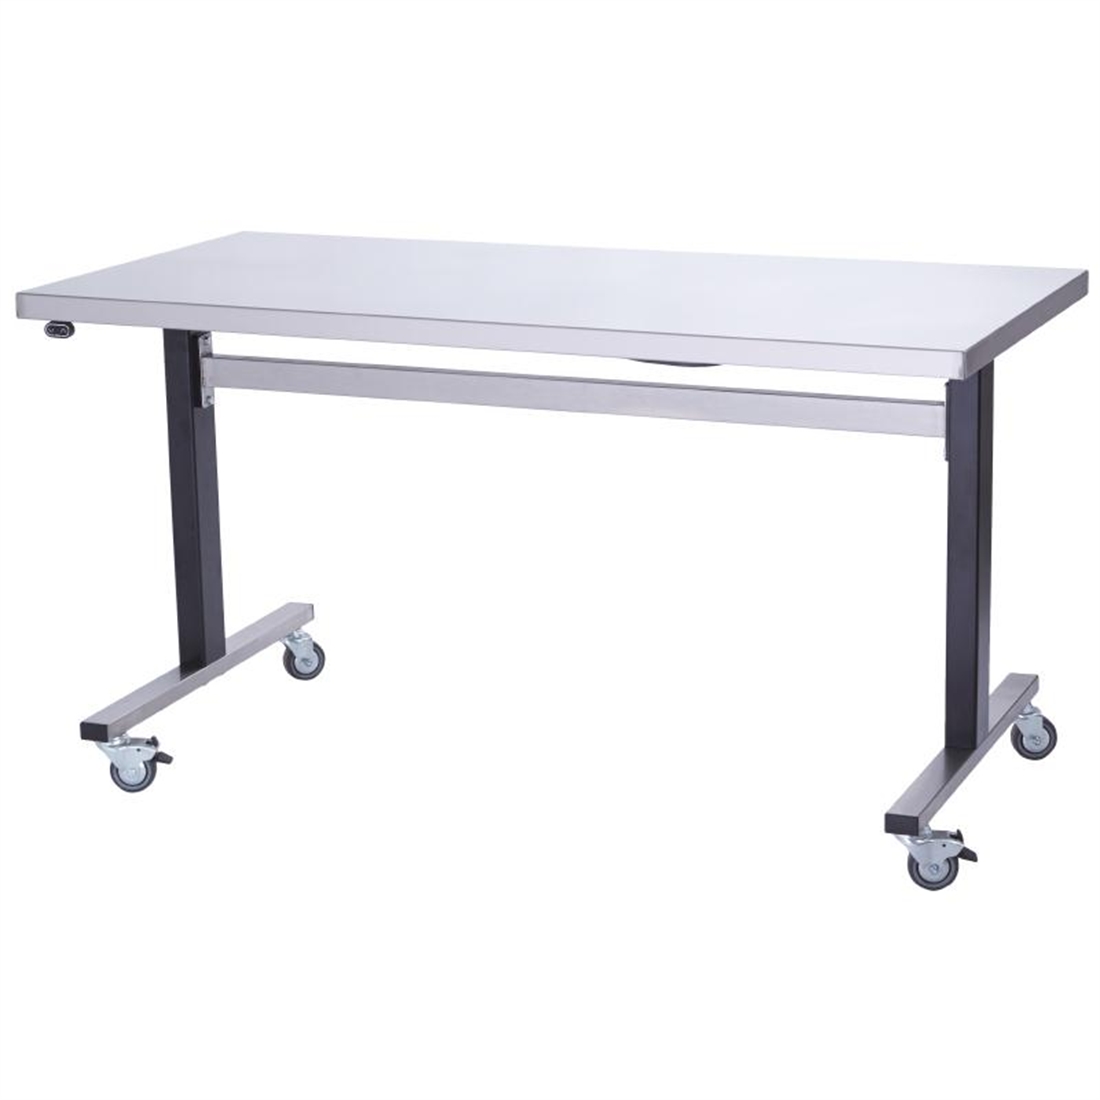 Parry Stainless Steel Adjustable Height Table Wide Electric Static 1000mm